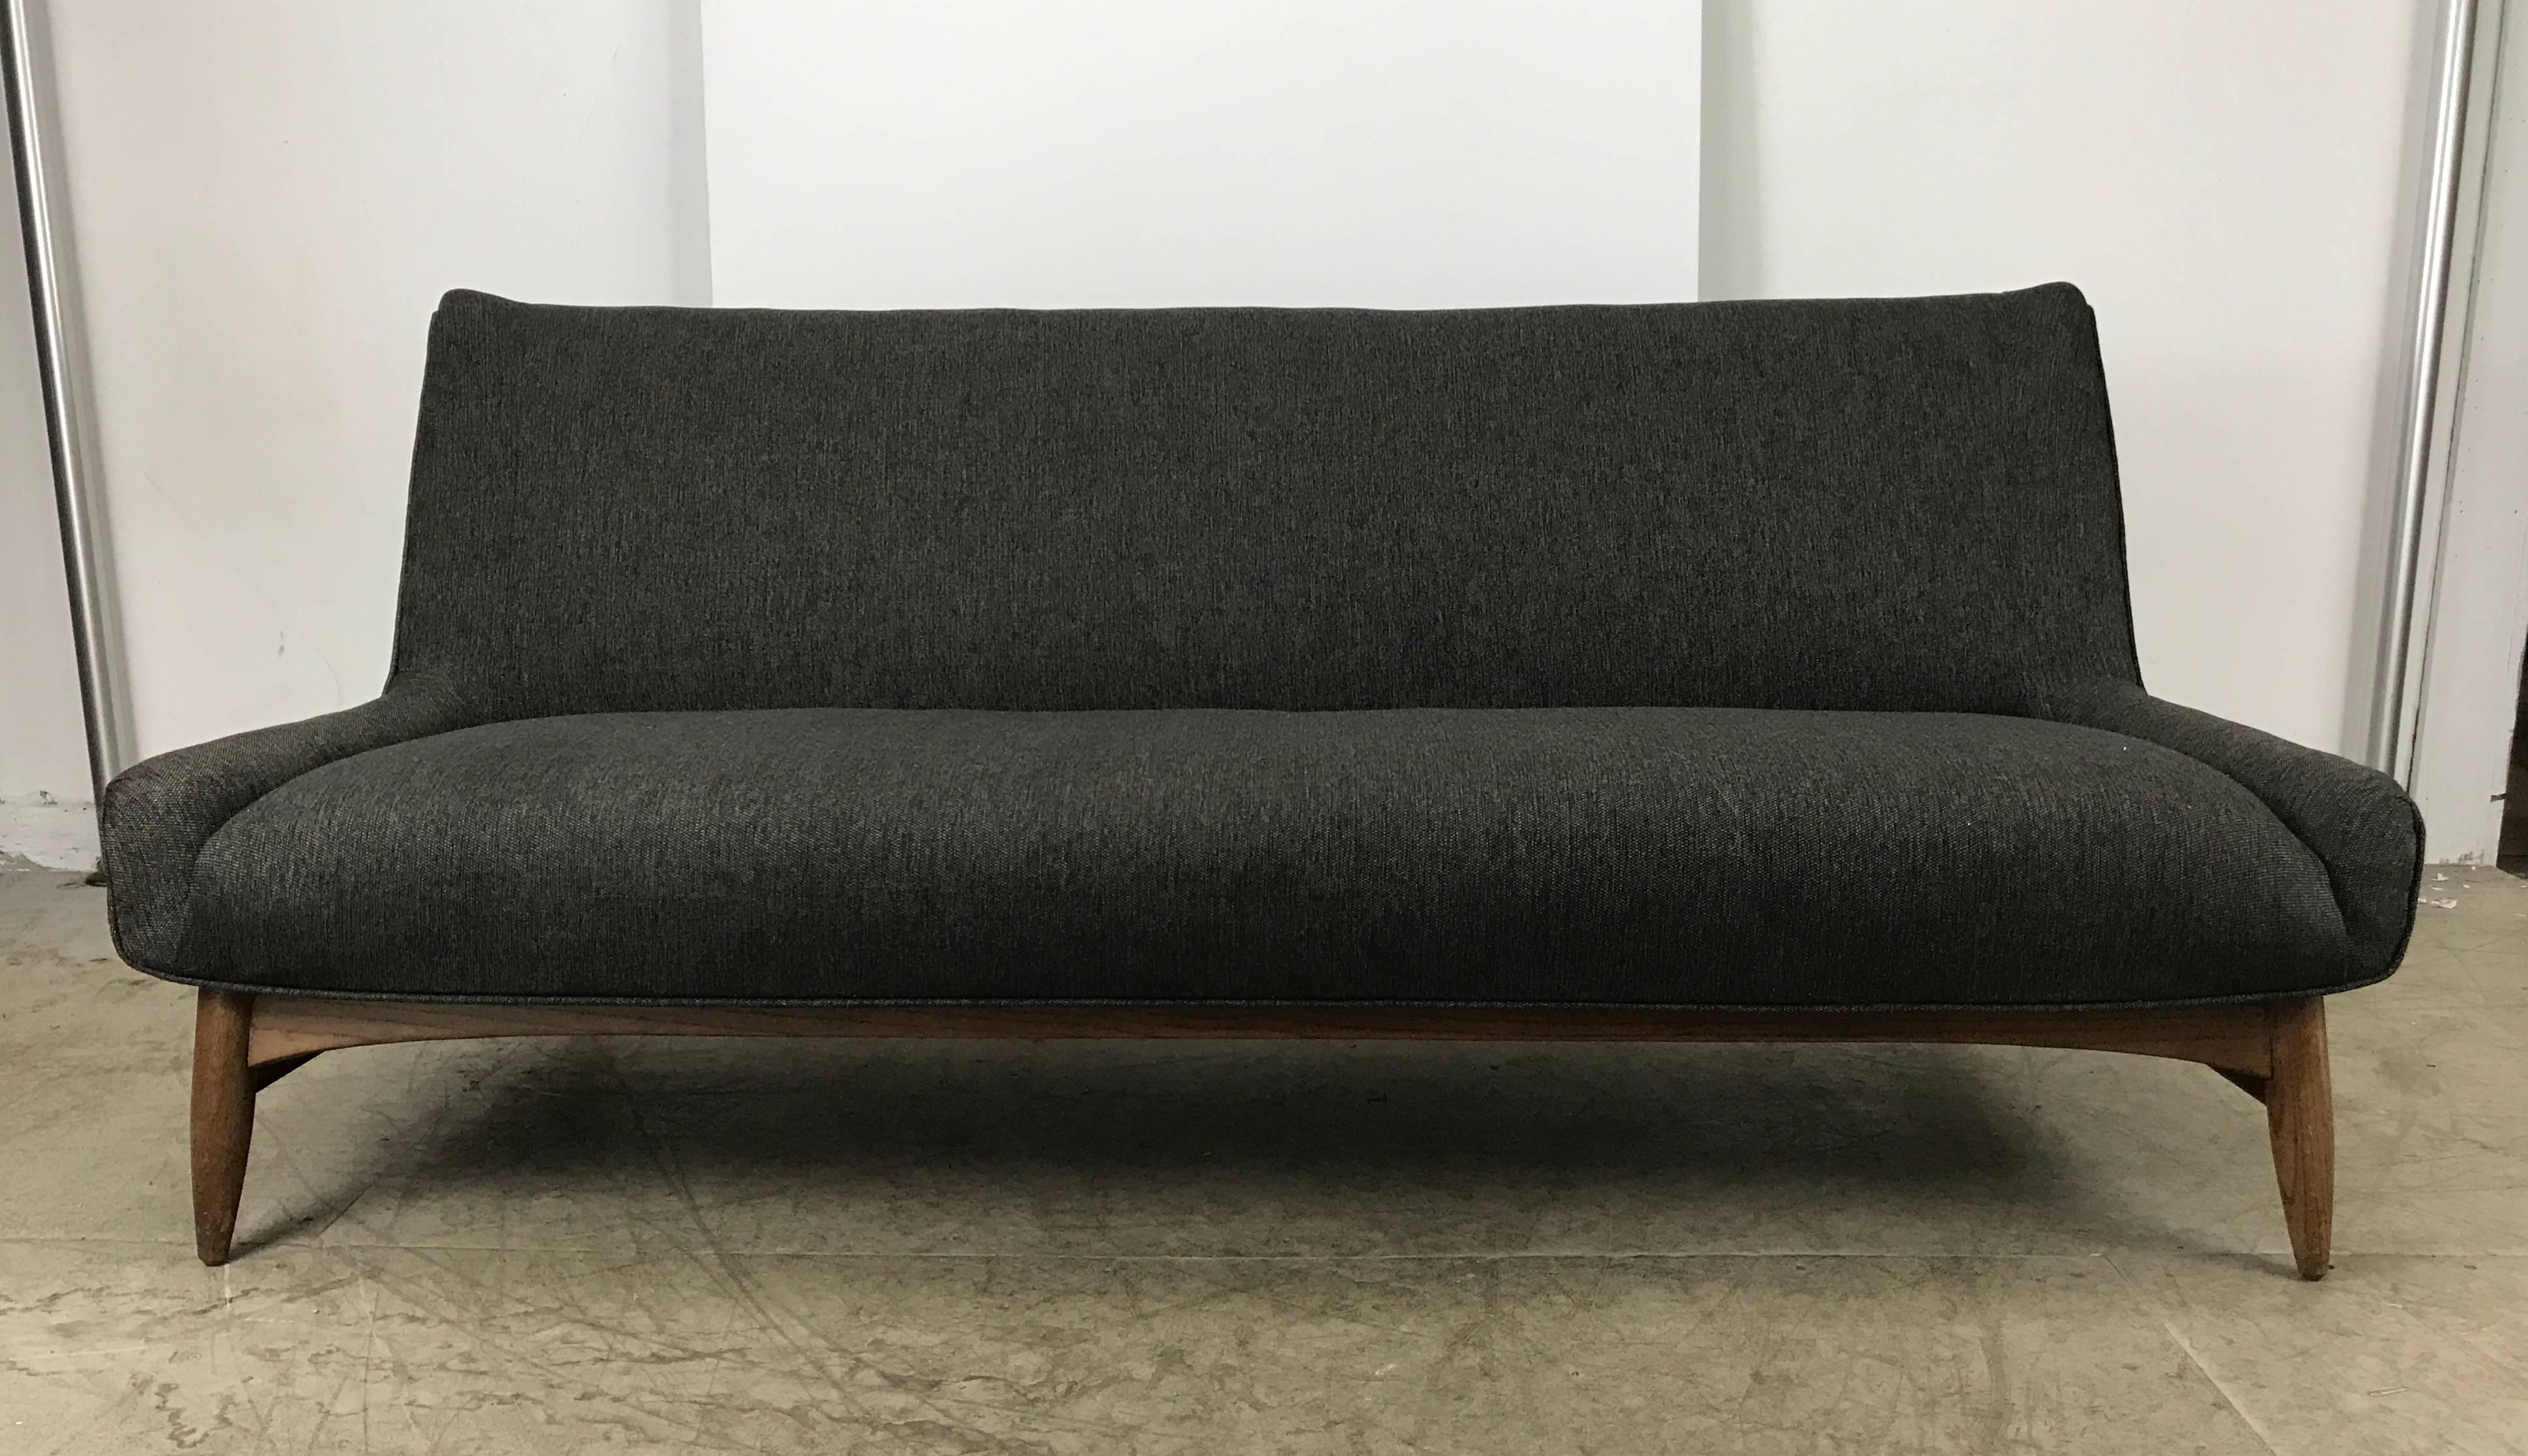 Stunning Danish modern sofa manner of Finn Juhl, Classic styling. Extremely comfortable, Recently reupholstered in a high quality grey wool fabric. Sculptural walnut wood frame. Hand delivery avail to New York City or anywhere enroute from Buffalo